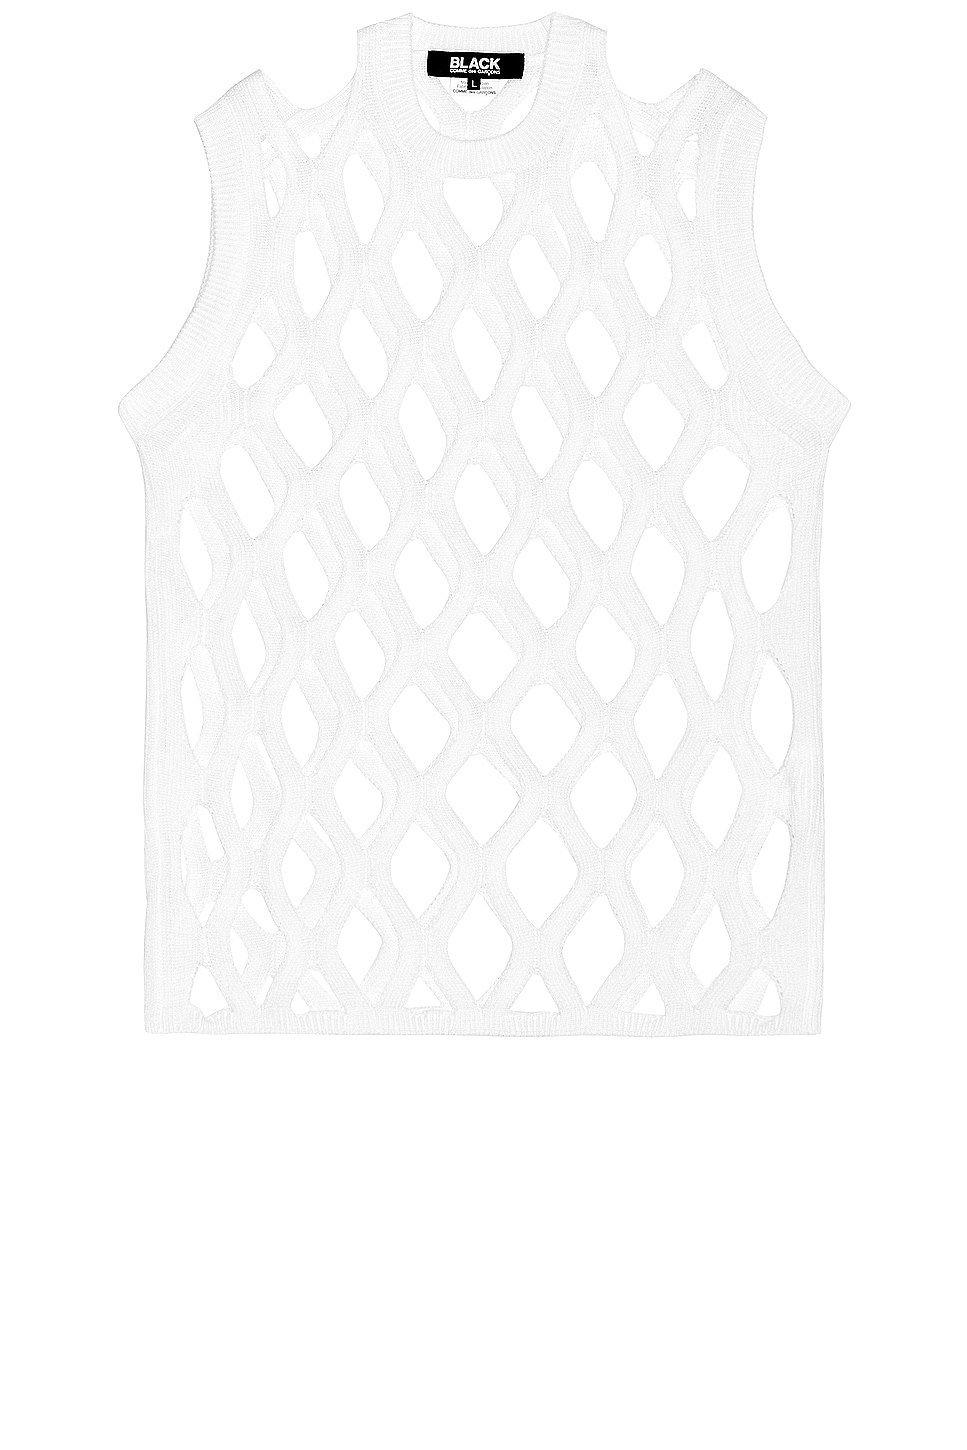 Image 1 of COMME des GARCONS BLACK Mesh Tank in White